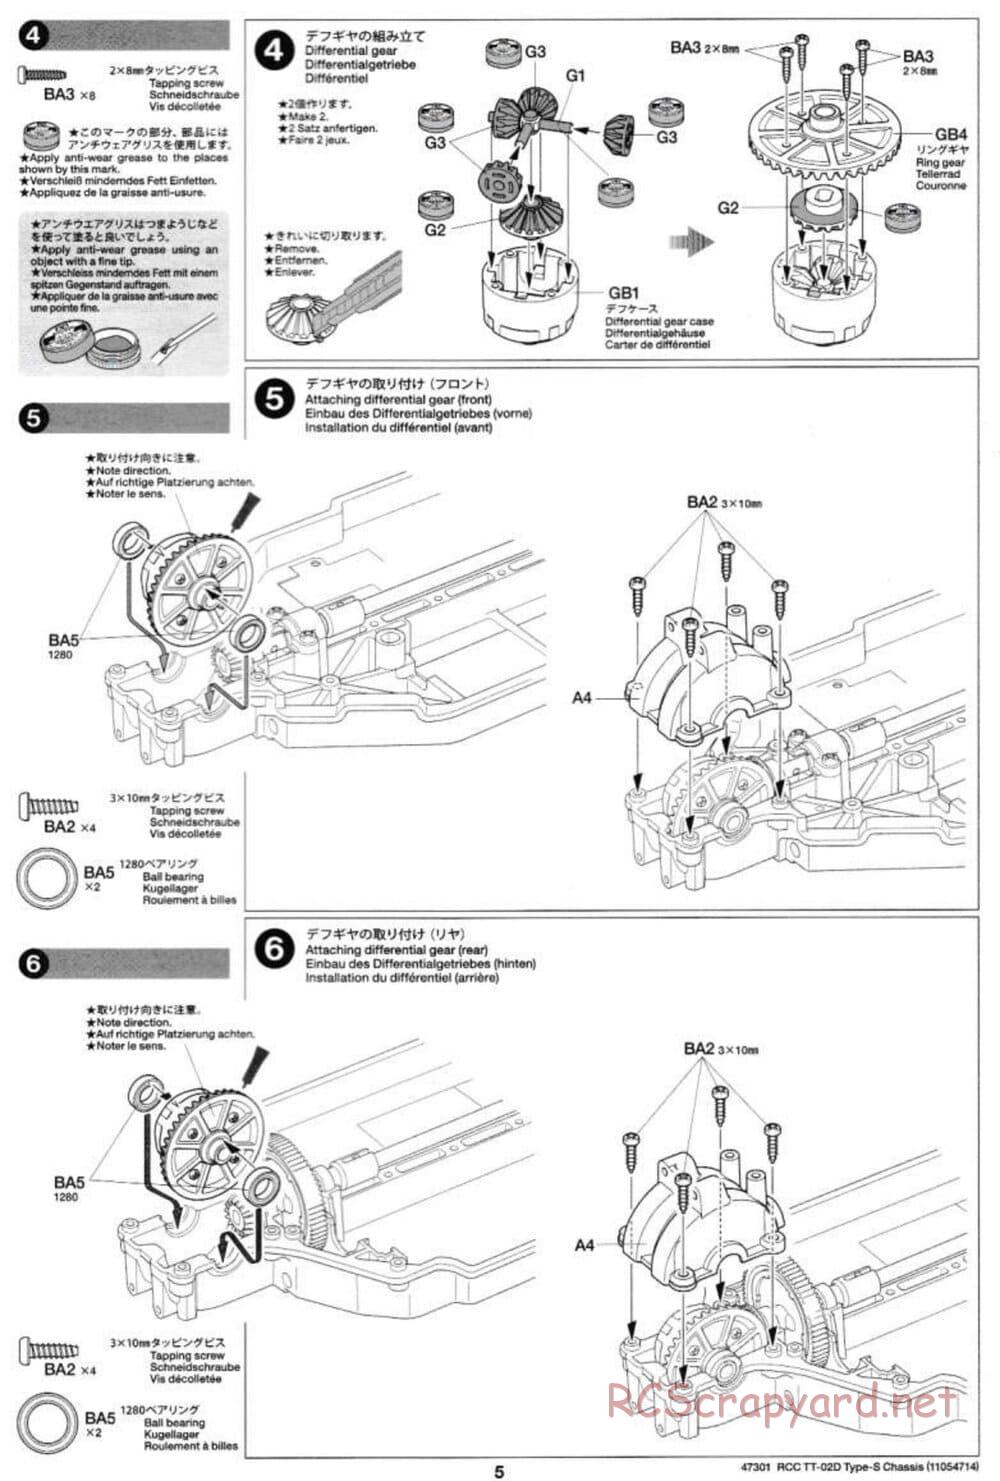 Tamiya - TT-02D Type-S Chassis - Manual - Page 5